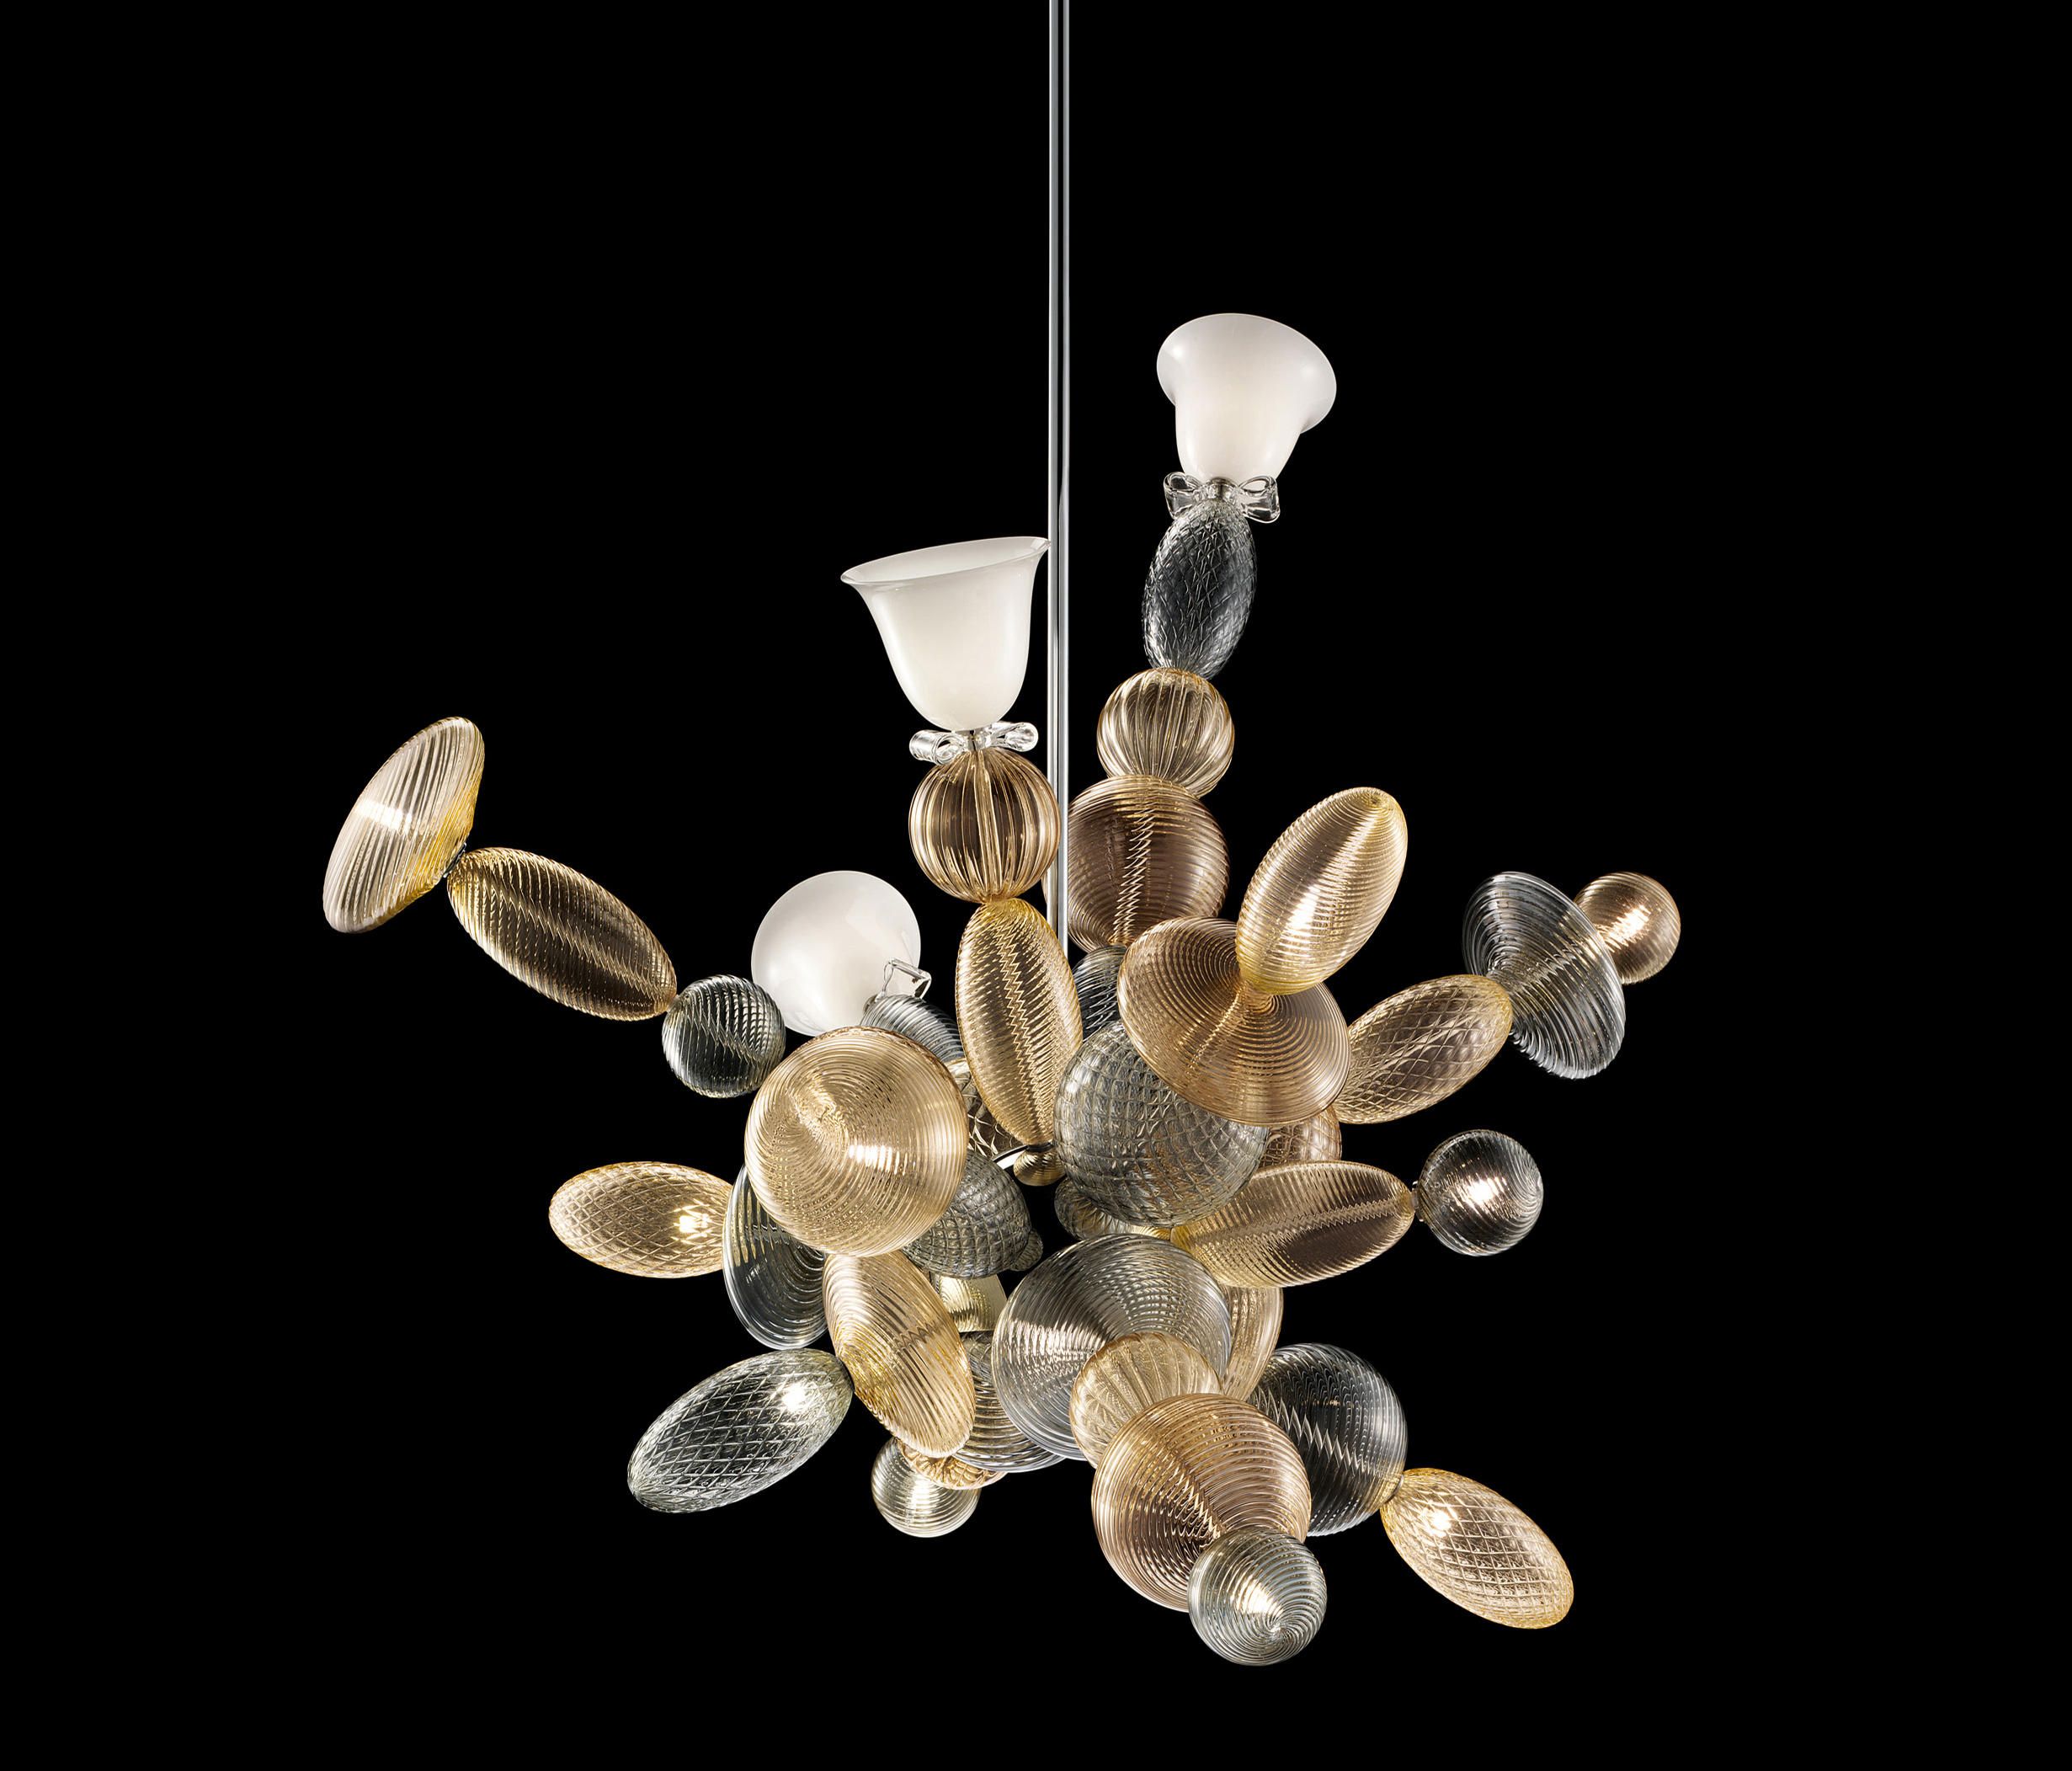 Perseus – Suspended Lights From Barovier&toso | Architonic Throughout Perseus 6 Light Candle Style Chandeliers (View 18 of 30)